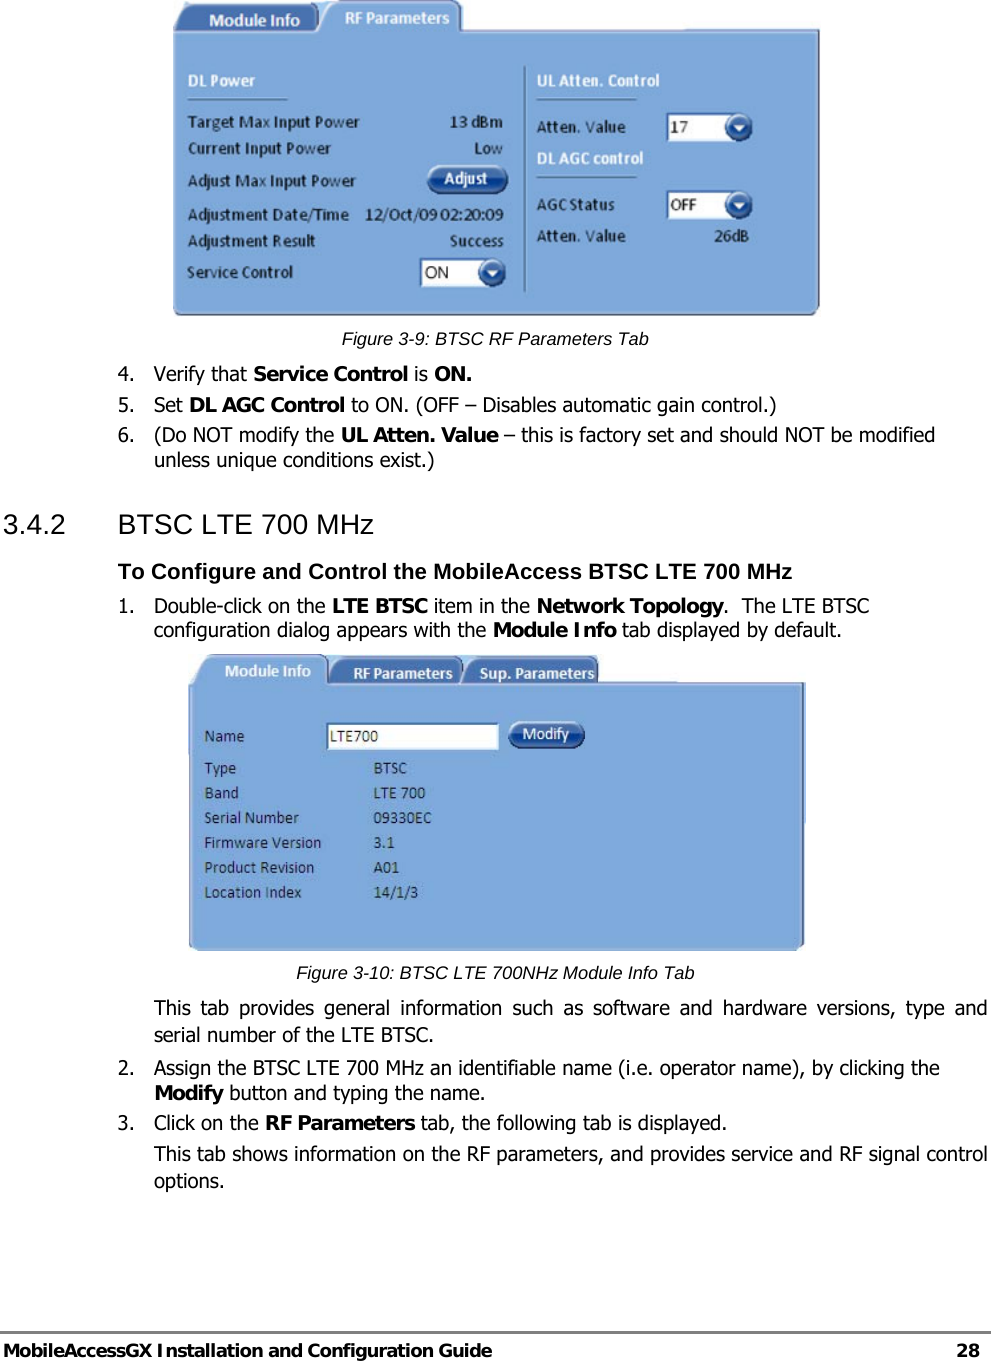   MobileAccessGX Installation and Configuration Guide   28   Figure 3-9: BTSC RF Parameters Tab 4. Verify that Service Control is ON.  5. Set DL AGC Control to ON. (OFF – Disables automatic gain control.) 6.  (Do NOT modify the UL Atten. Value – this is factory set and should NOT be modified unless unique conditions exist.) 3.4.2  BTSC LTE 700 MHz To Configure and Control the MobileAccess BTSC LTE 700 MHz 1.  Double-click on the LTE BTSC item in the Network Topology.  The LTE BTSC configuration dialog appears with the Module Info tab displayed by default.   Figure 3-10: BTSC LTE 700NHz Module Info Tab This tab provides general information such as software and hardware versions, type and serial number of the LTE BTSC. 2.  Assign the BTSC LTE 700 MHz an identifiable name (i.e. operator name), by clicking the Modify button and typing the name.  3. Click on the RF Parameters tab, the following tab is displayed. This tab shows information on the RF parameters, and provides service and RF signal control options. 